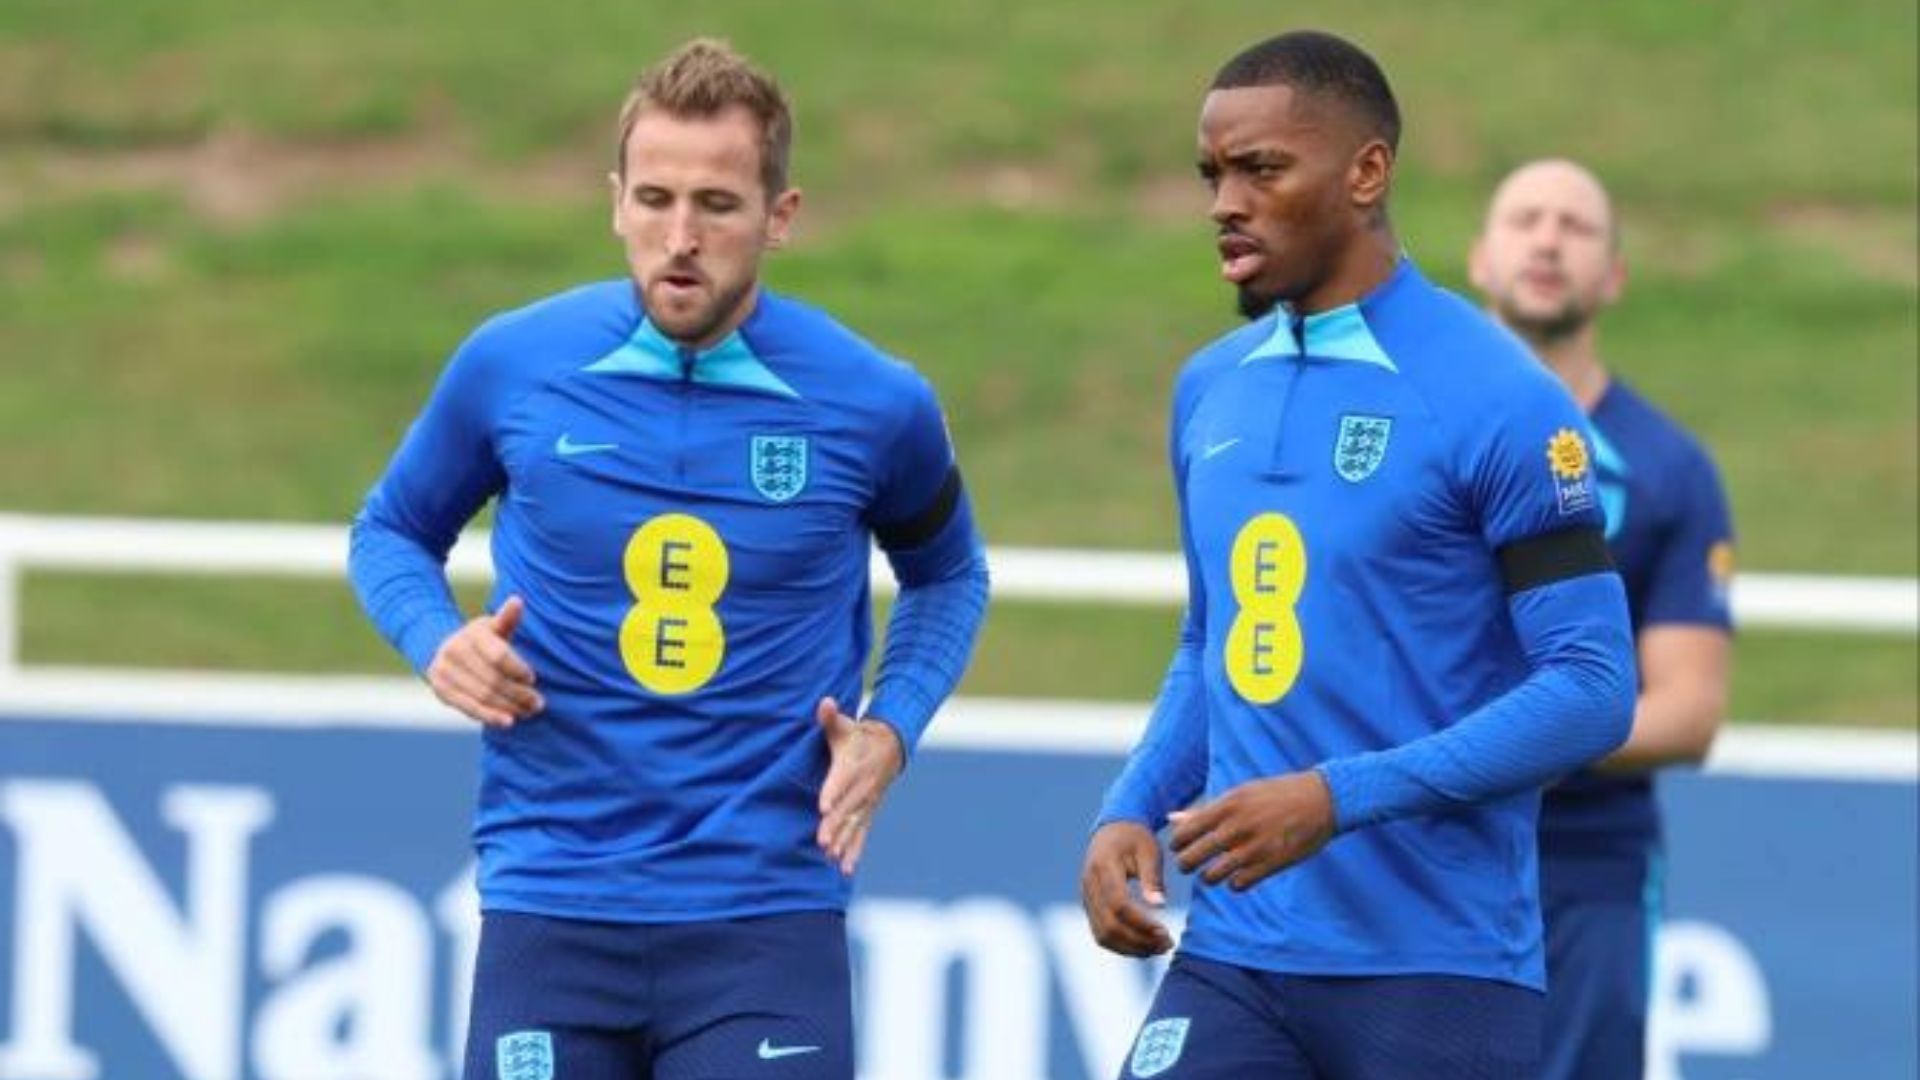 England star could be handed six-month ban in huge blow to club and country aspirations CaughtOffside